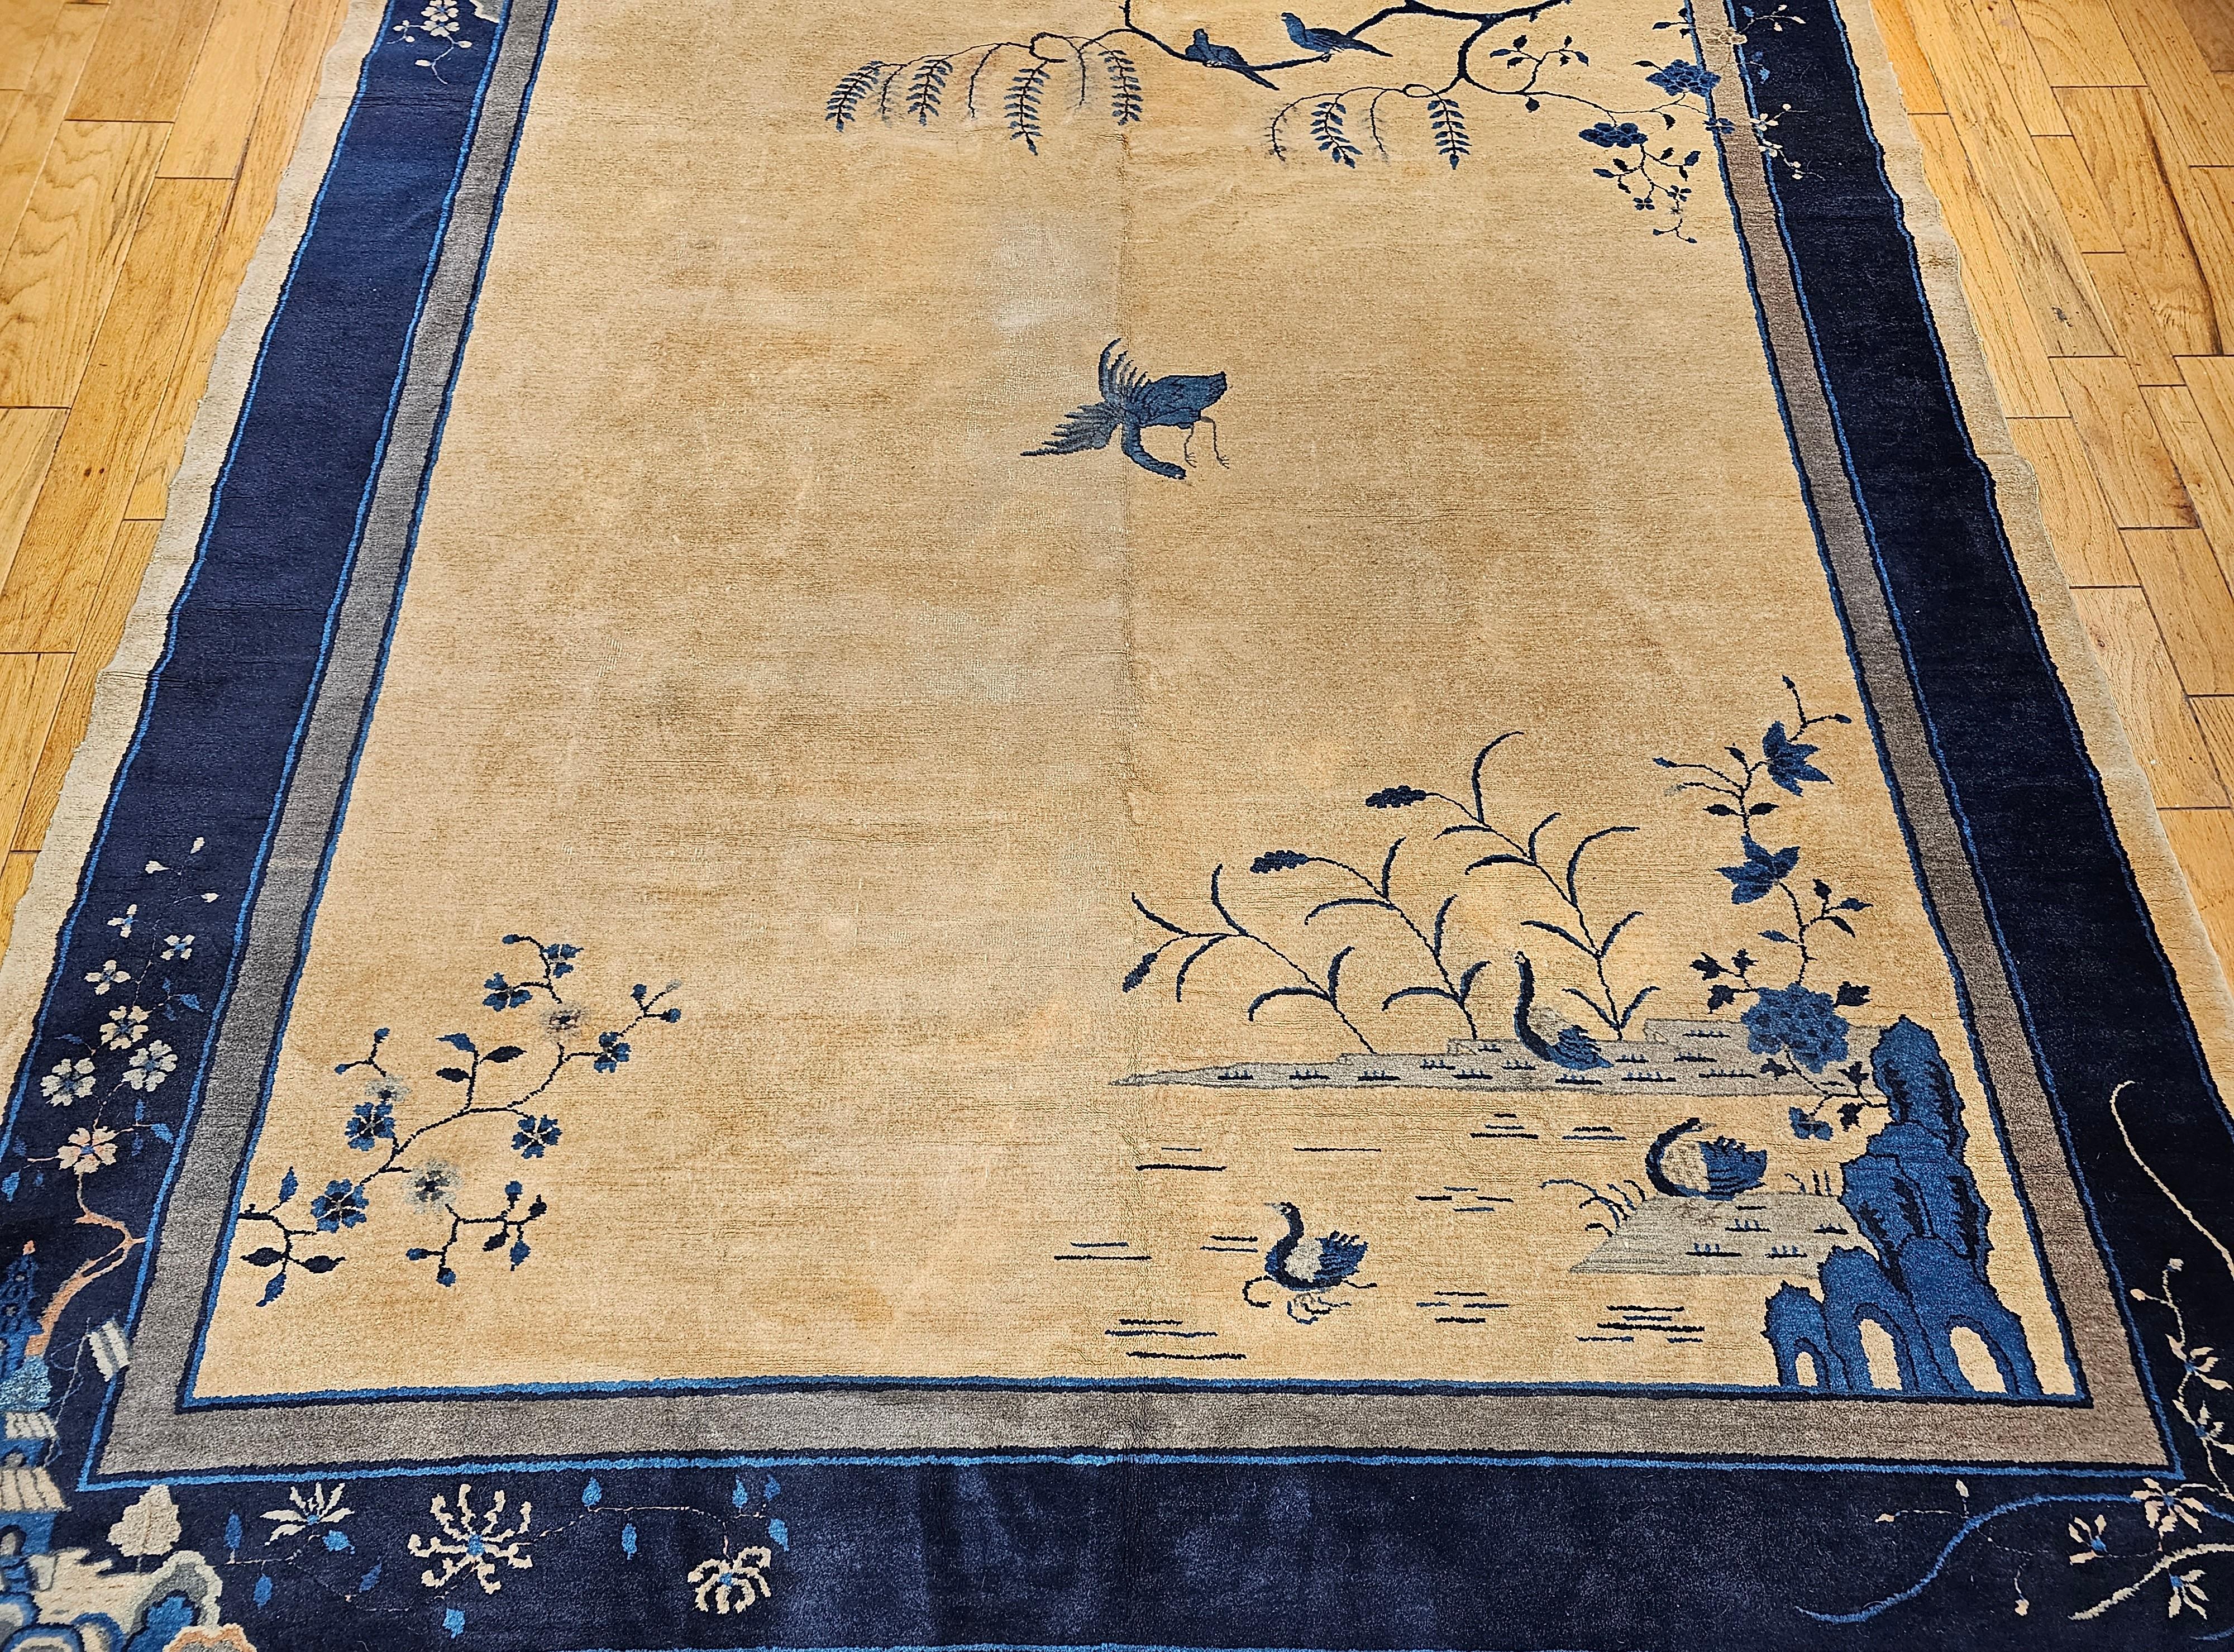 Hand-Knotted Vintage Art Deco Chinese Rug with Cranes, Pagoda, Mountains in Wheat, Blue, Navy For Sale